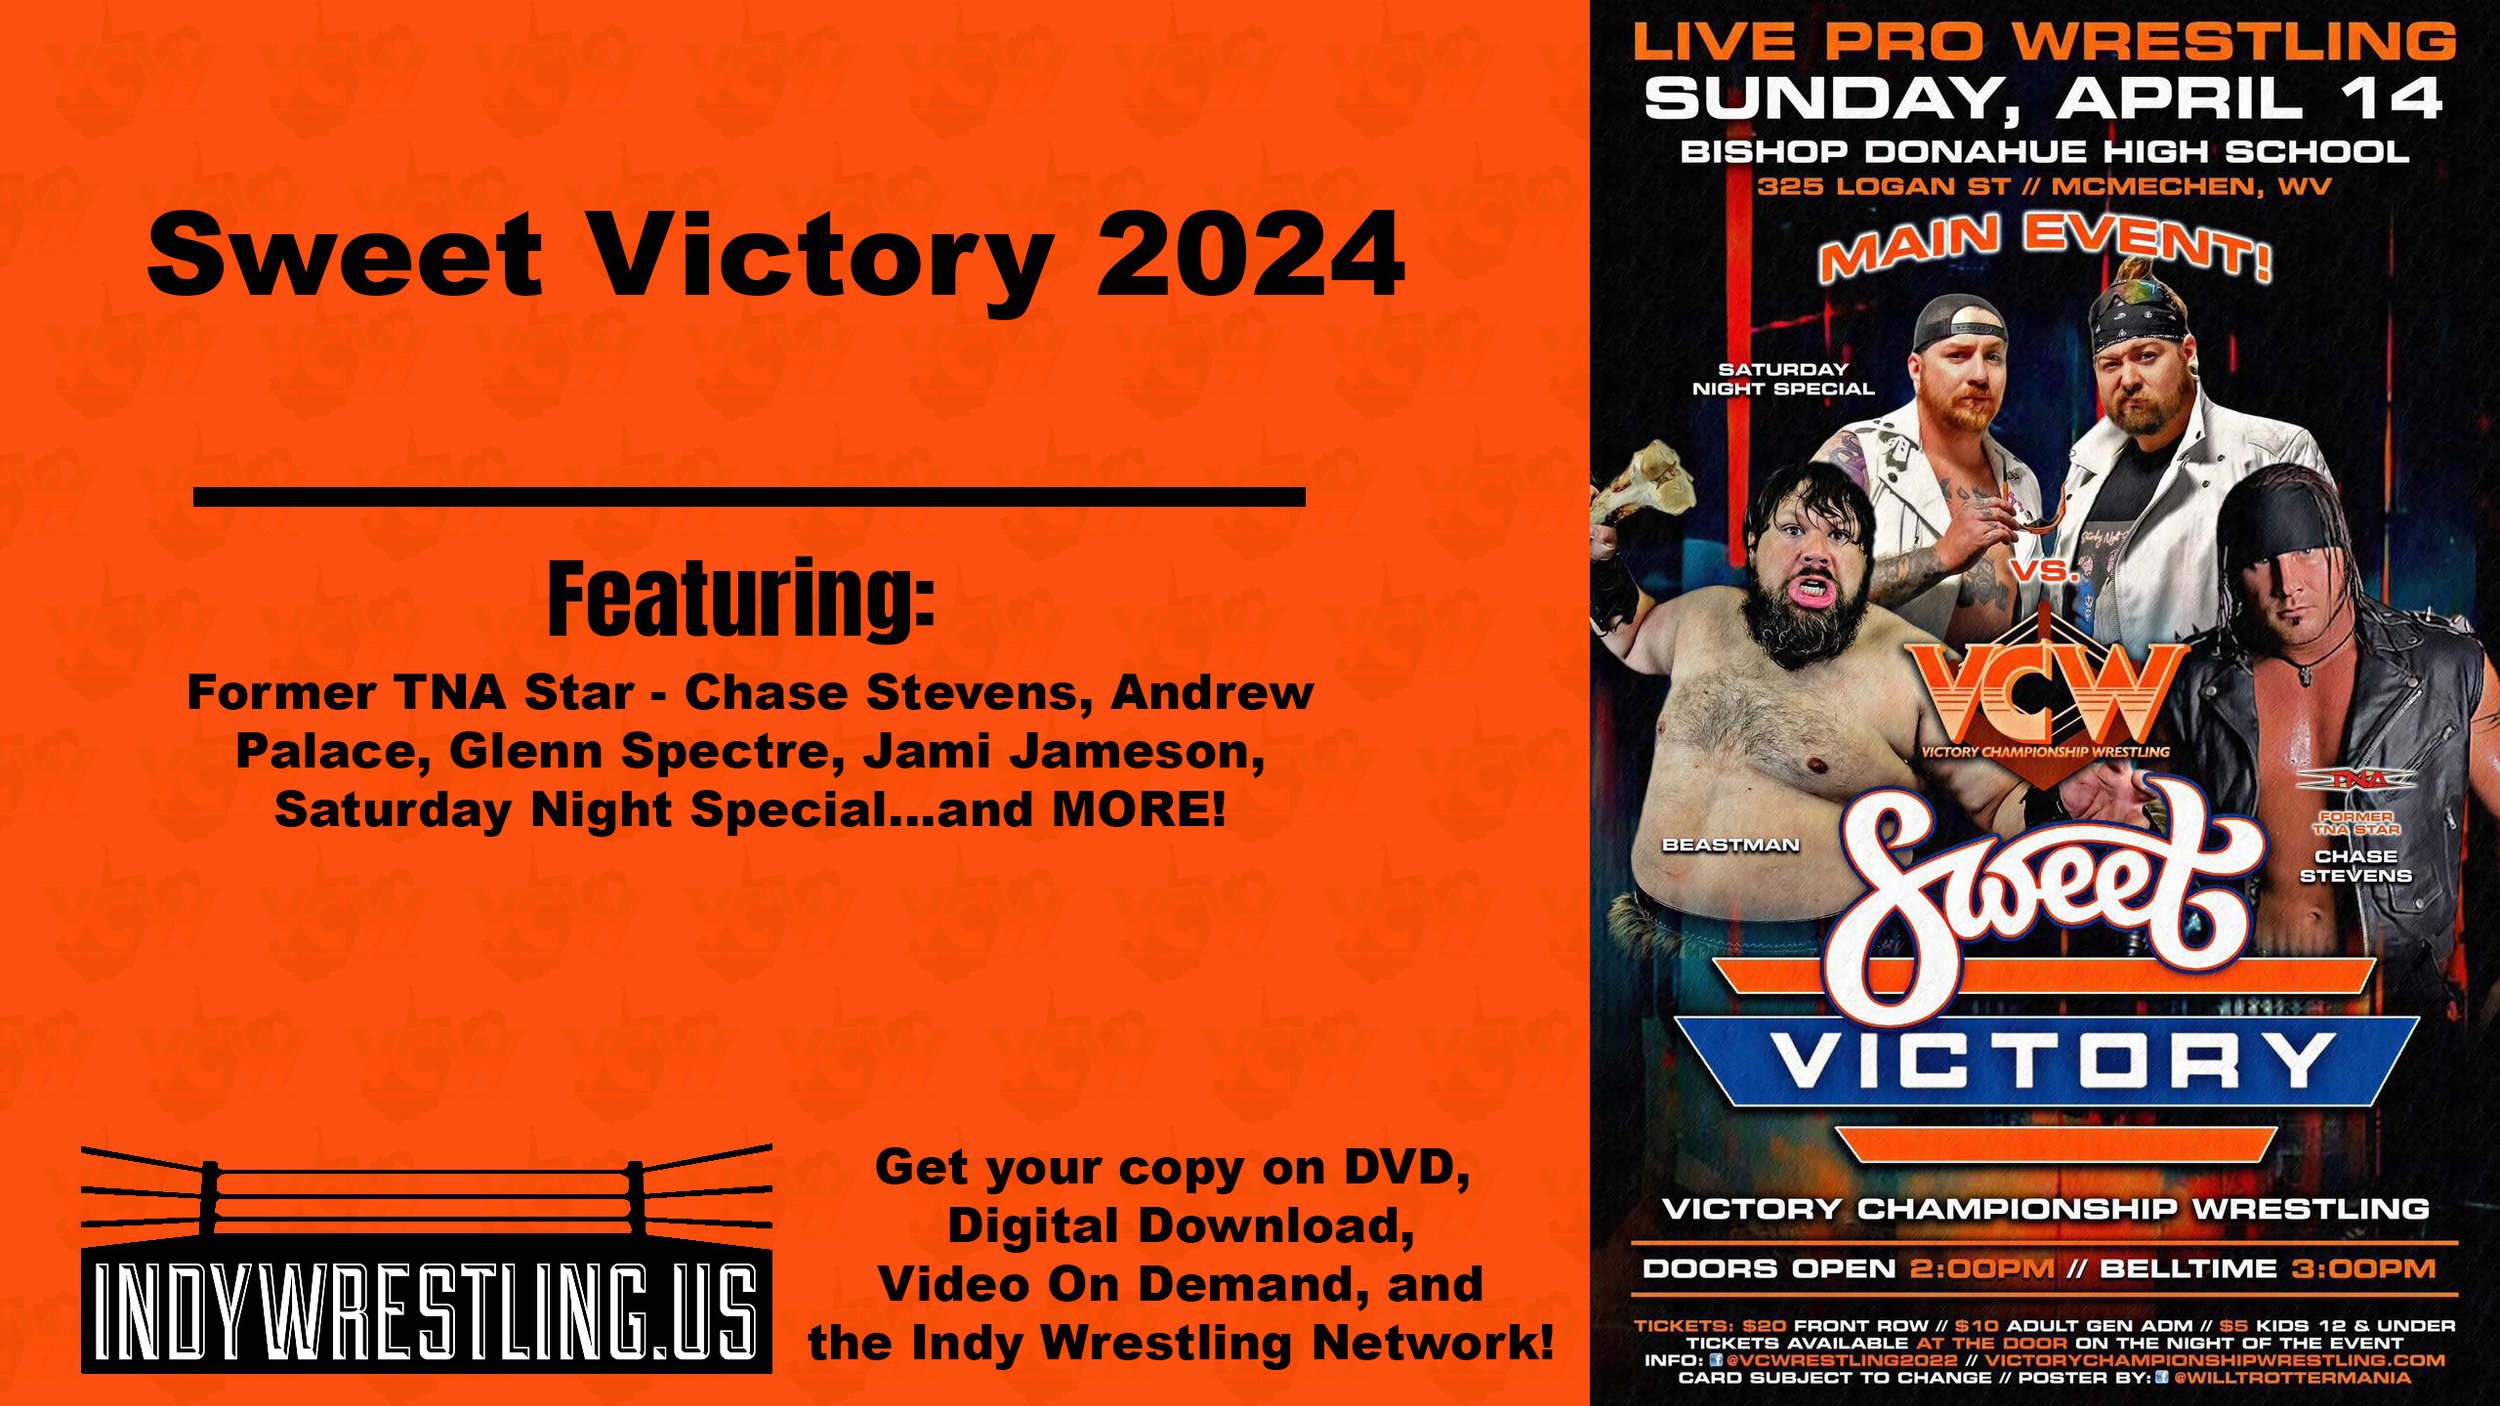 2024.04.14 Sweet Victory 2024 VCW Indy Wrestling Rotating Banner.jpg